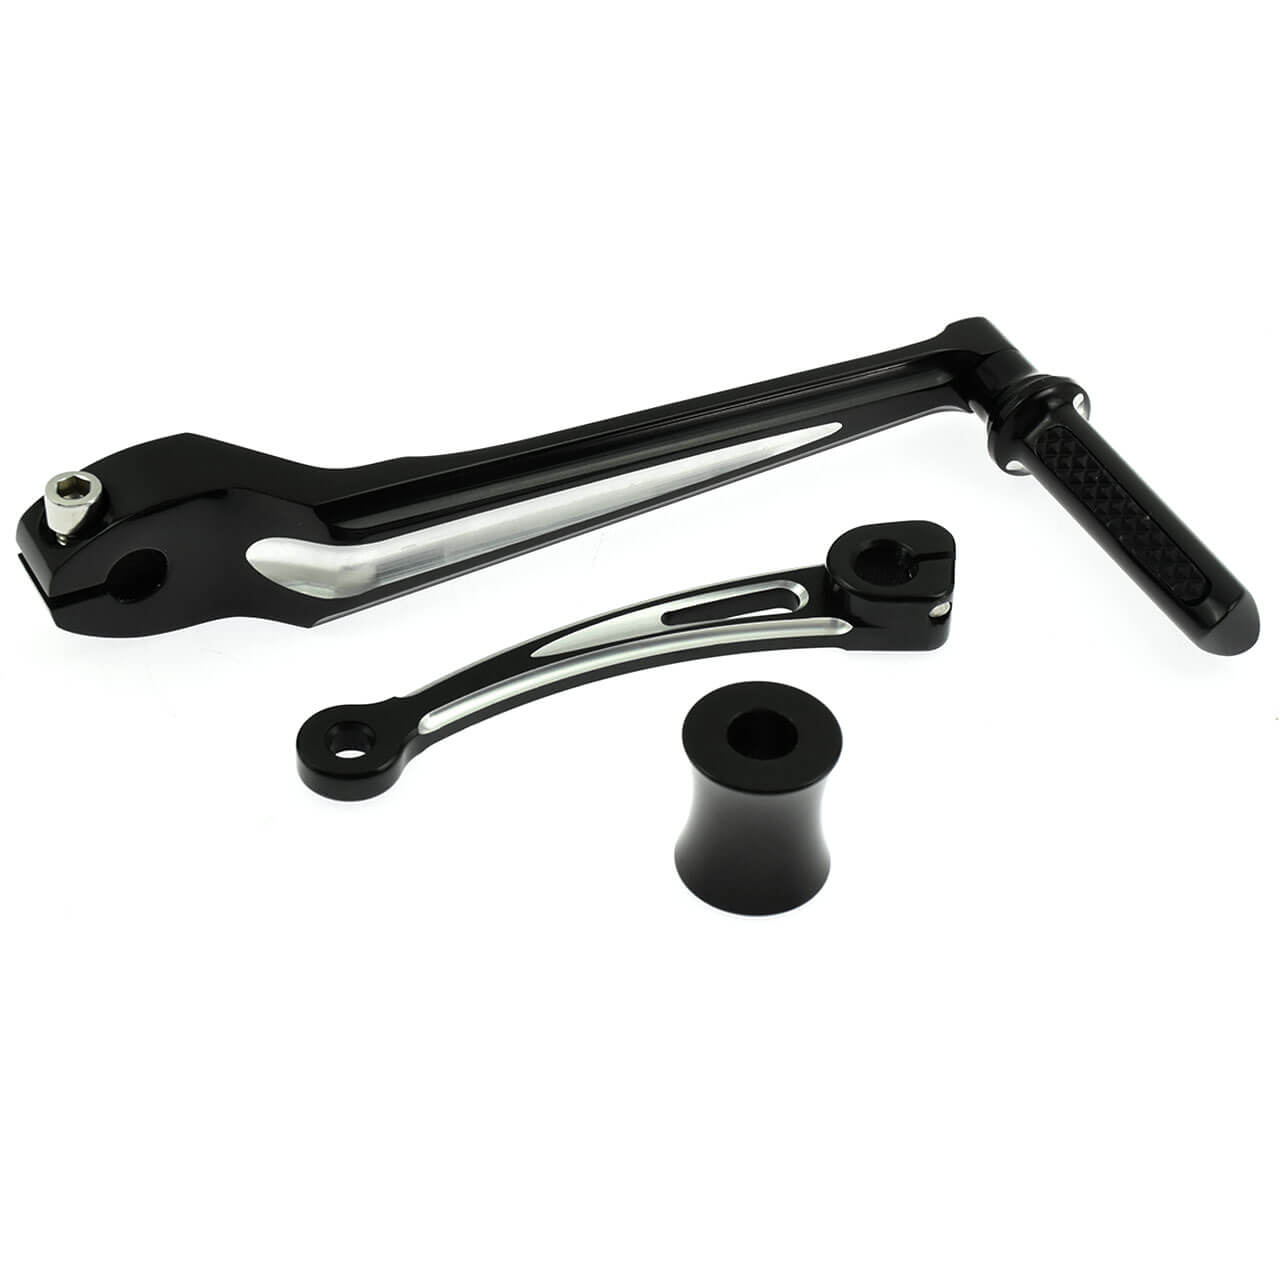 Shifter Road Lever Kits Fit Harley Softail '86-'17 Touring '88-'18 Tri '08-'18 | Mactions